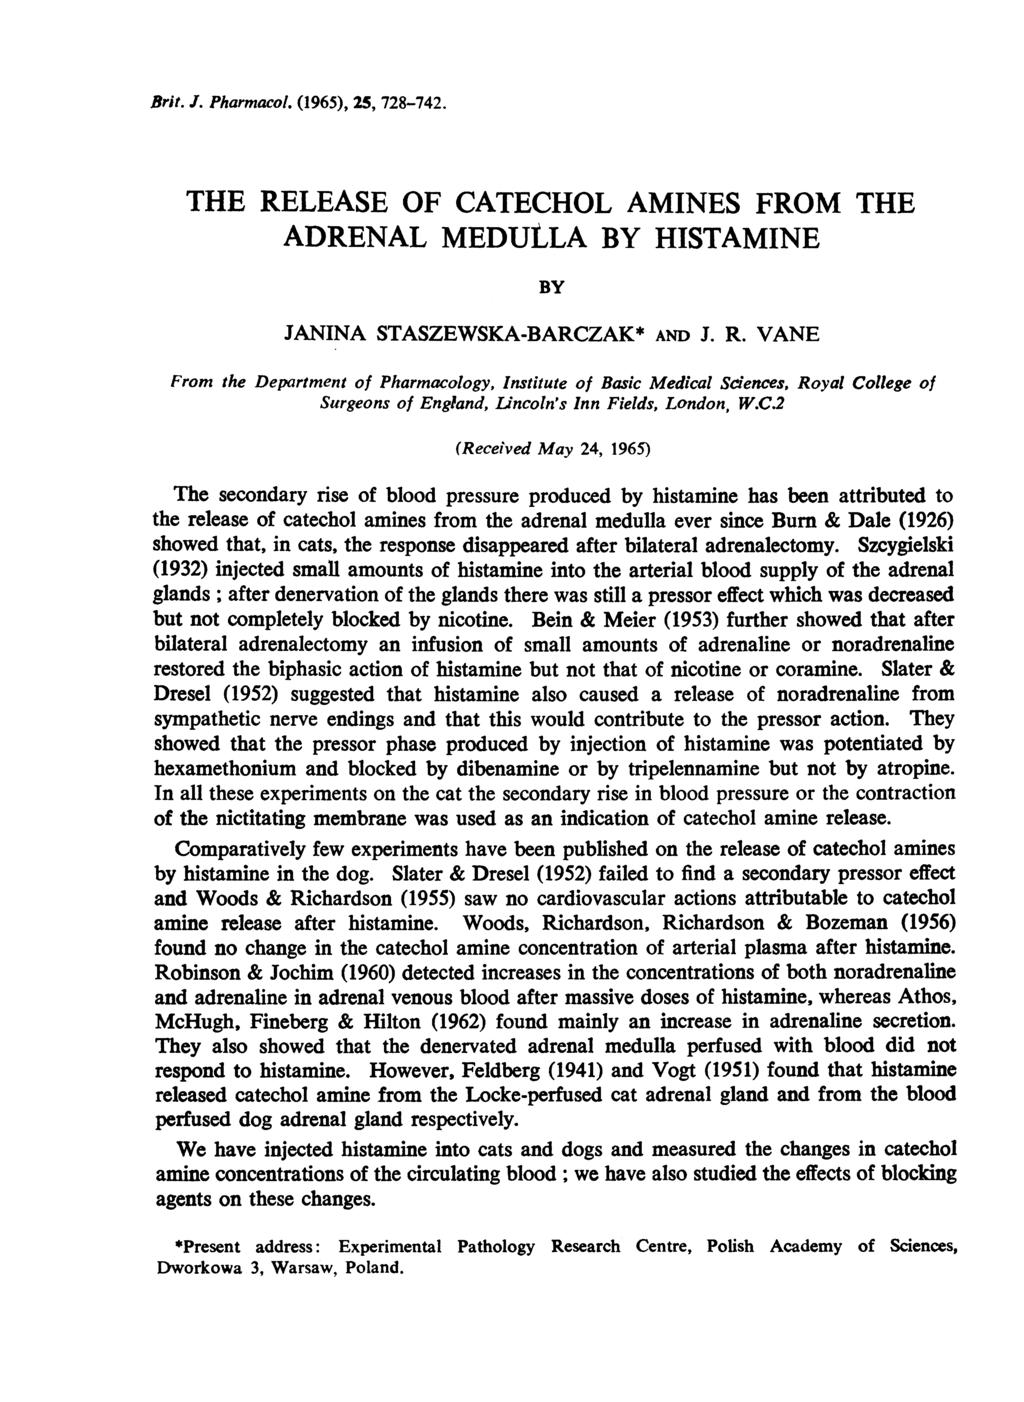 Brit. J. Pharmacol. (1965), 25, 728-742. THE RELEASE OF CATECHOL AMINES FROM THE ADRENAL MEDULLA BY HISTAMINE BY JANINA STASZEWSKA-BARCZAK* AND J. R. VANE From the Department of Pharmacology, Institute of Basic Medical Sciences, Royal College of Surgeons of England, Lincoln's Inn Fields, London, W.